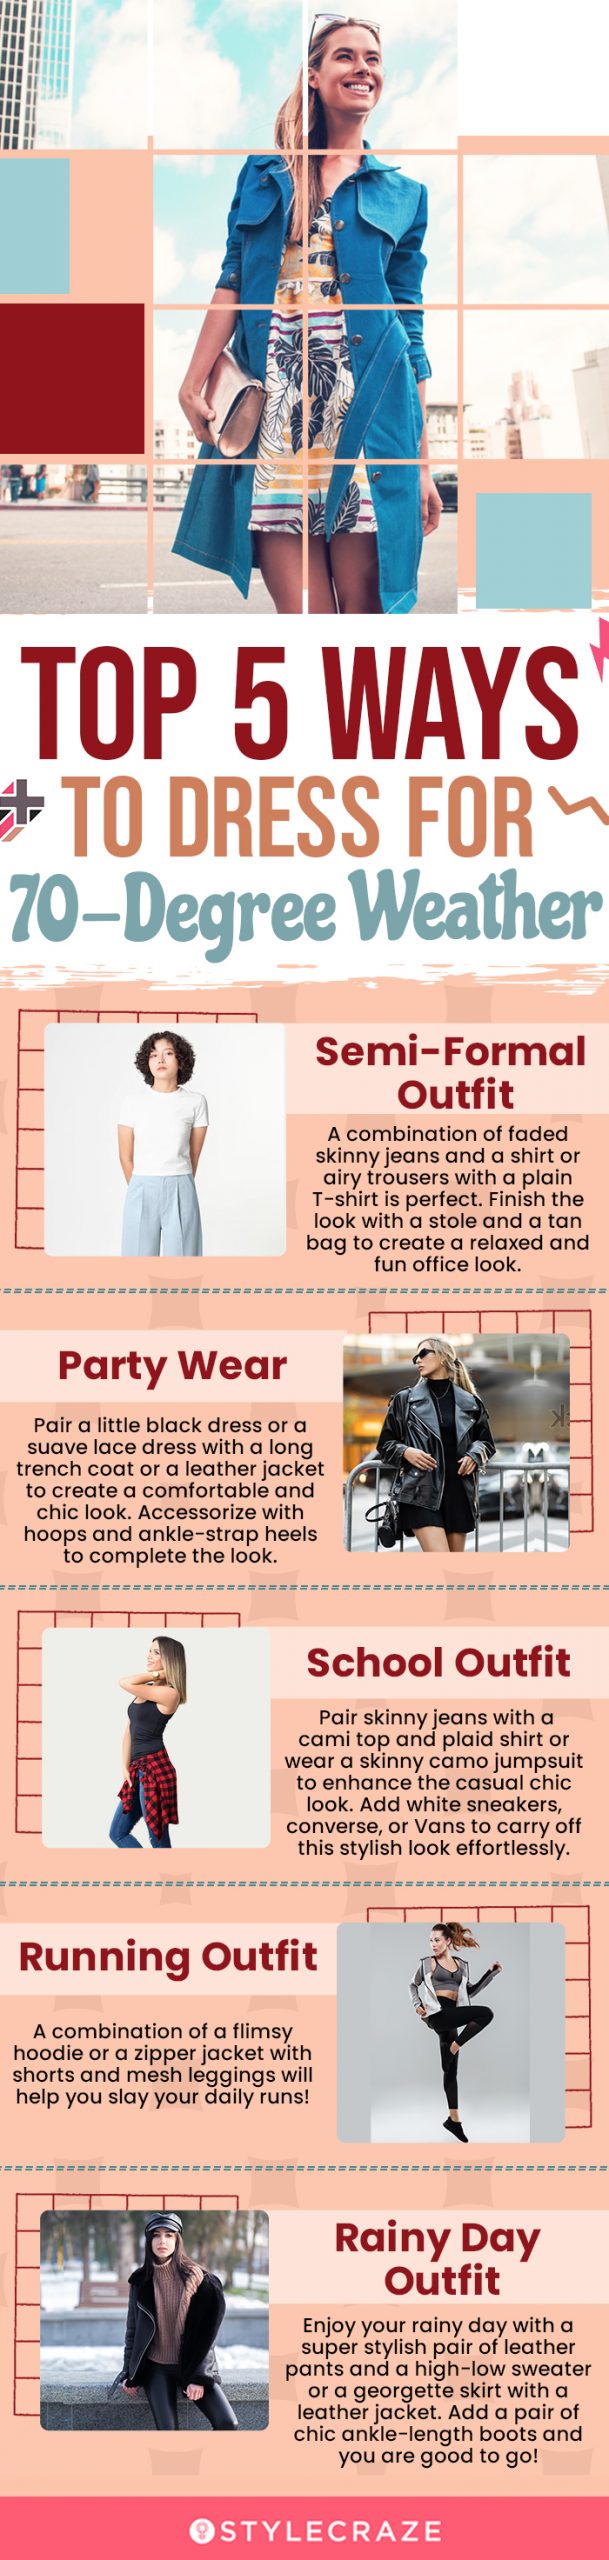 top 5 ways to dress for 70 degree weather (infographic)